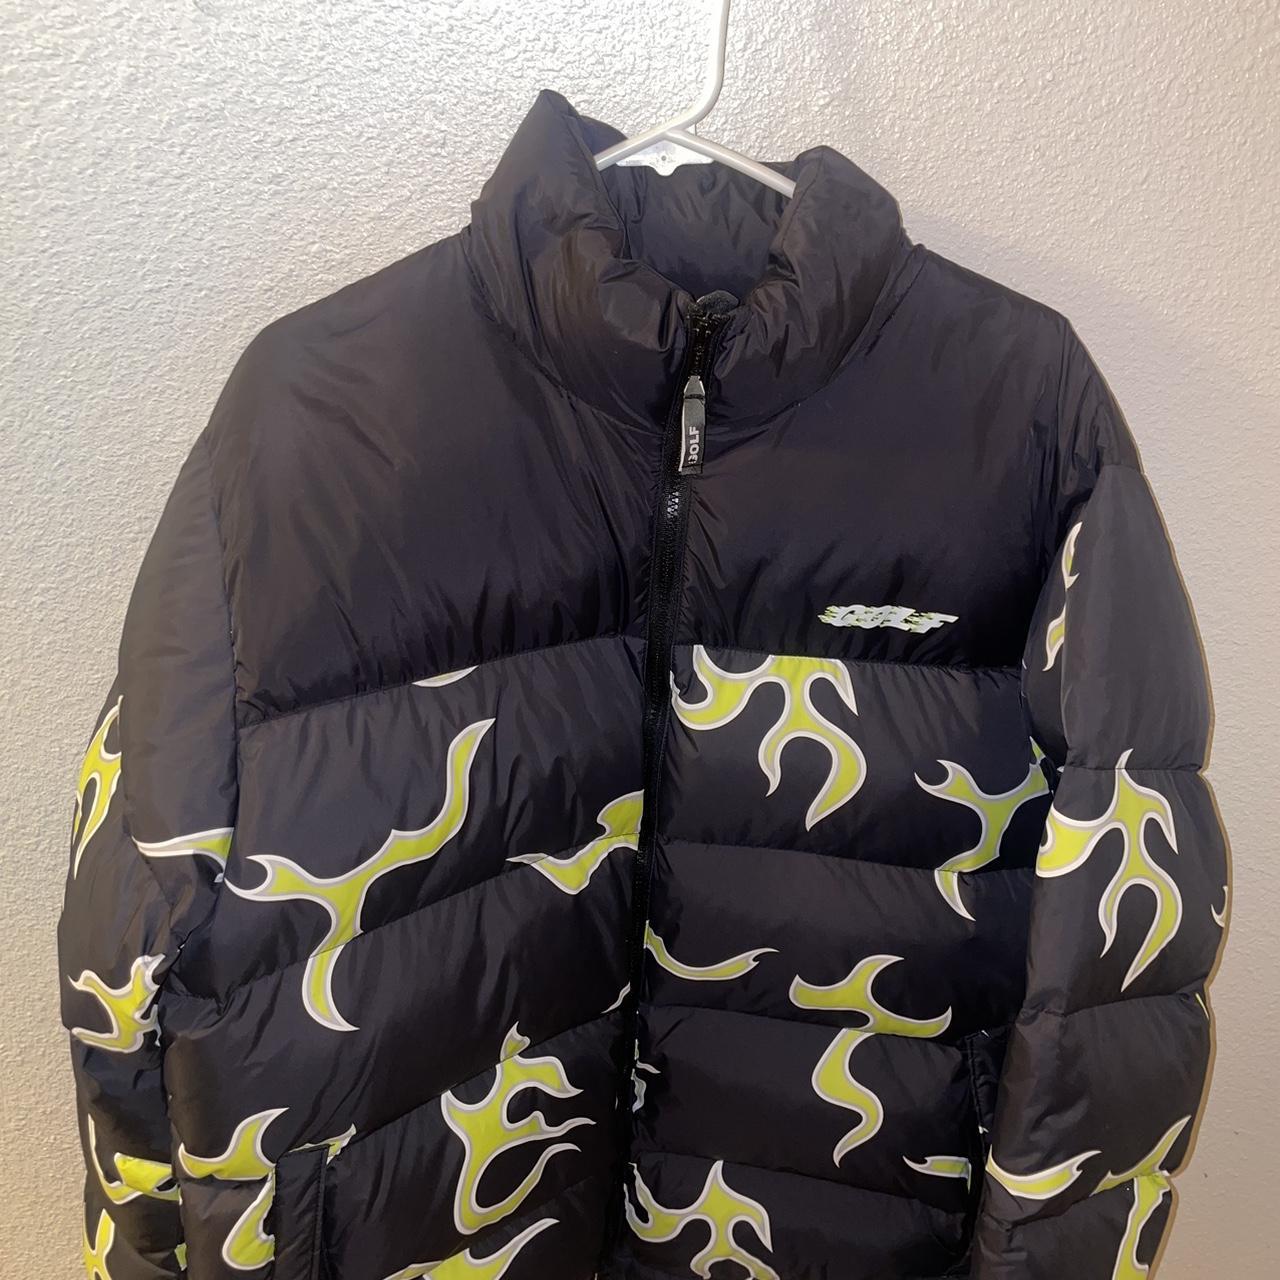 Black Flame Golf Puffer by Tyler the creator.